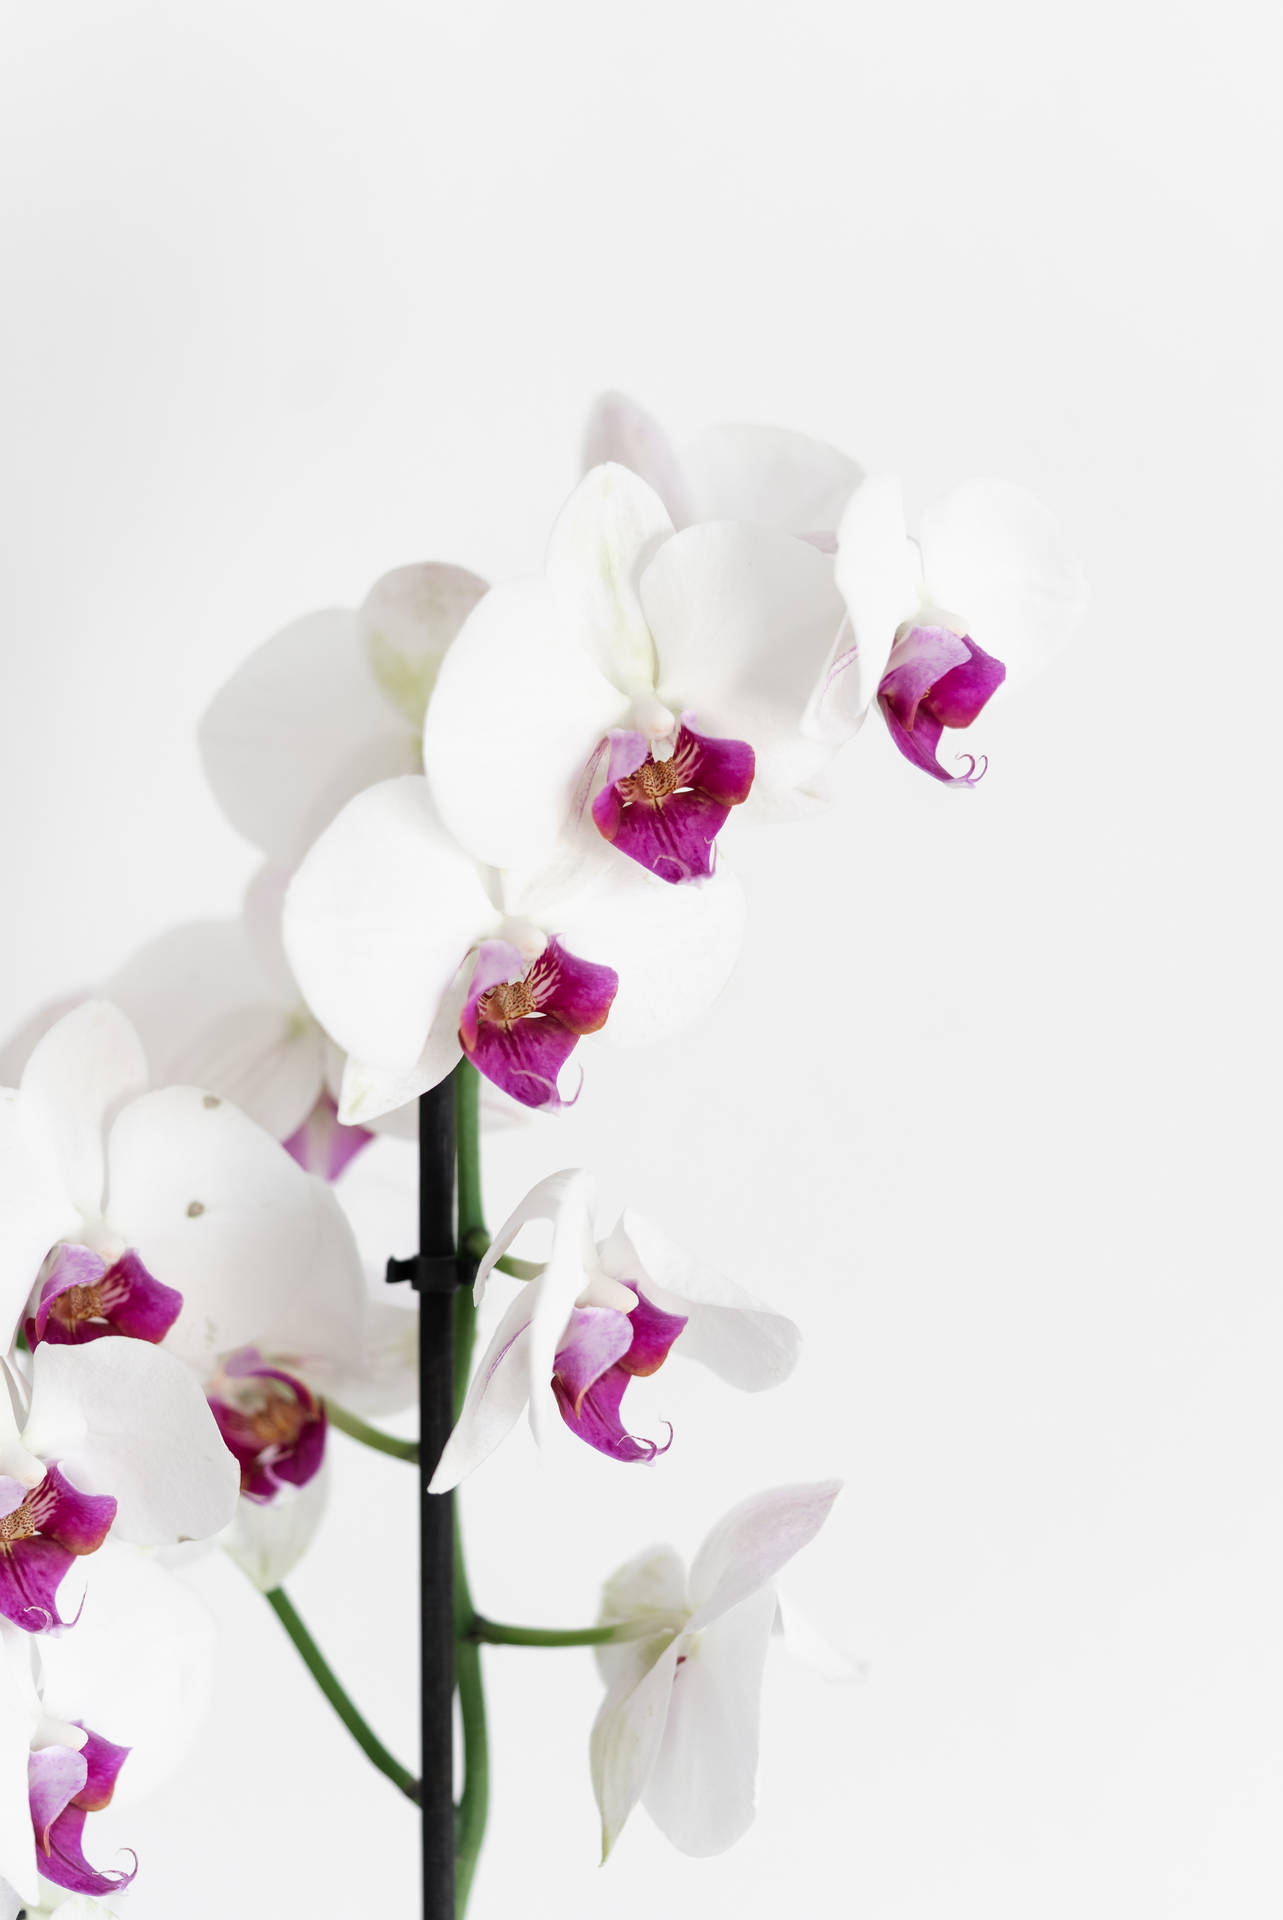 Phalaenopsis Aphrodite Orchid Flower Android Wallpaper